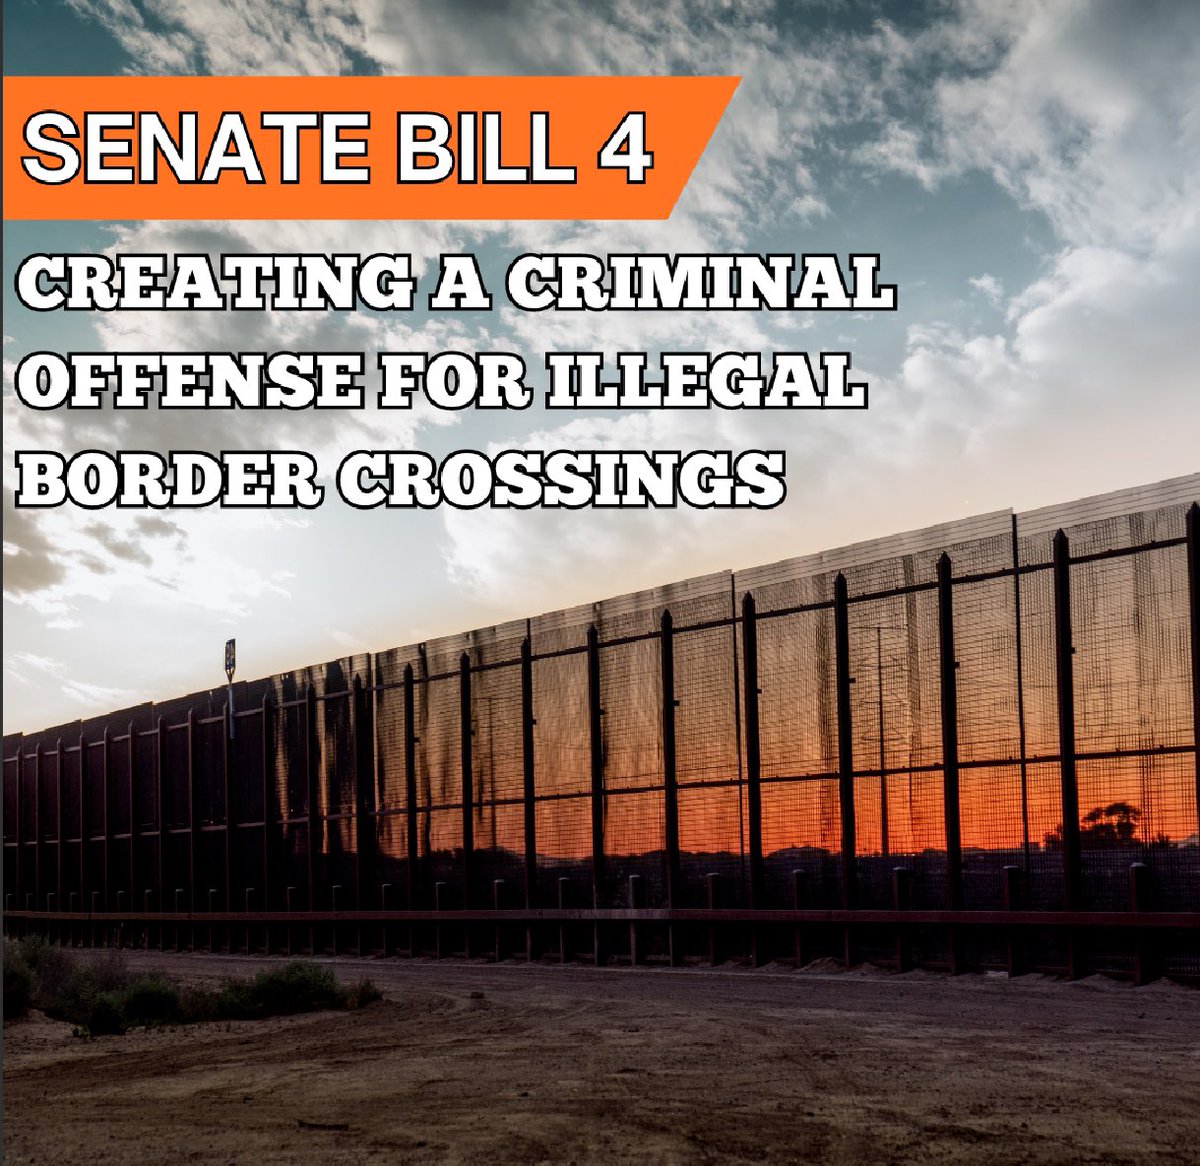 The impact of the border crisis has advanced beyond the border, affecting communities across the state. SB 4 seeks to address the issue of border security by creating criminal offenses related to illegal entry into this state and illegal reentry. Its on its way to the Gov.